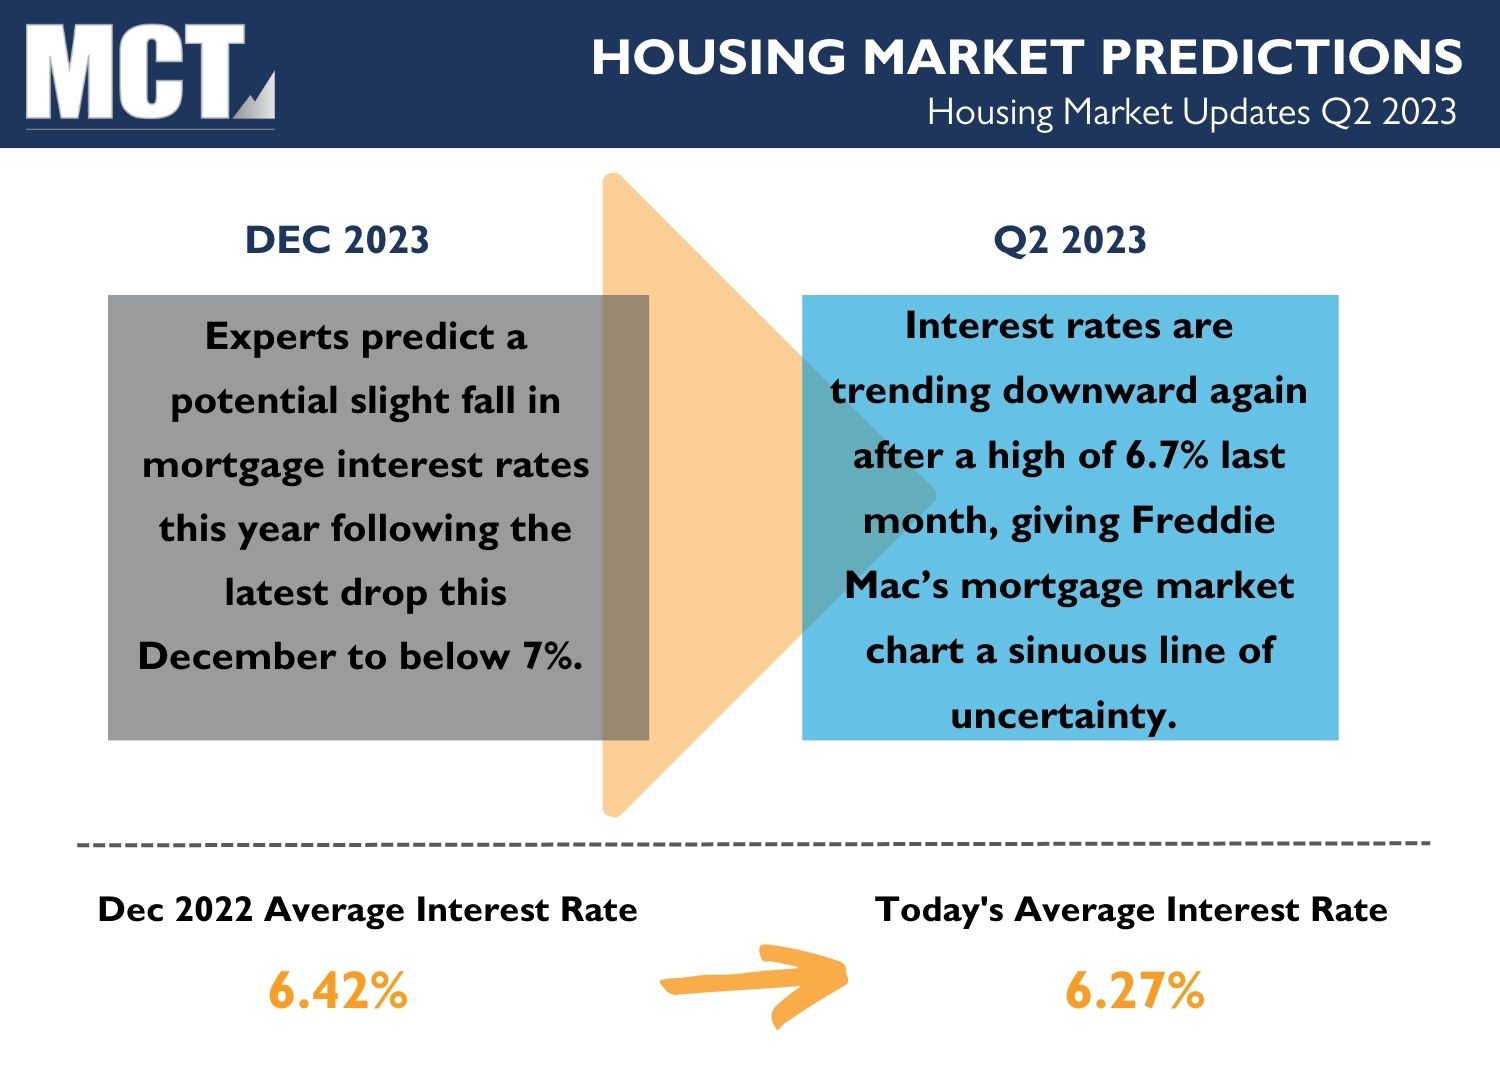 Housing market predictions for Q2 2023